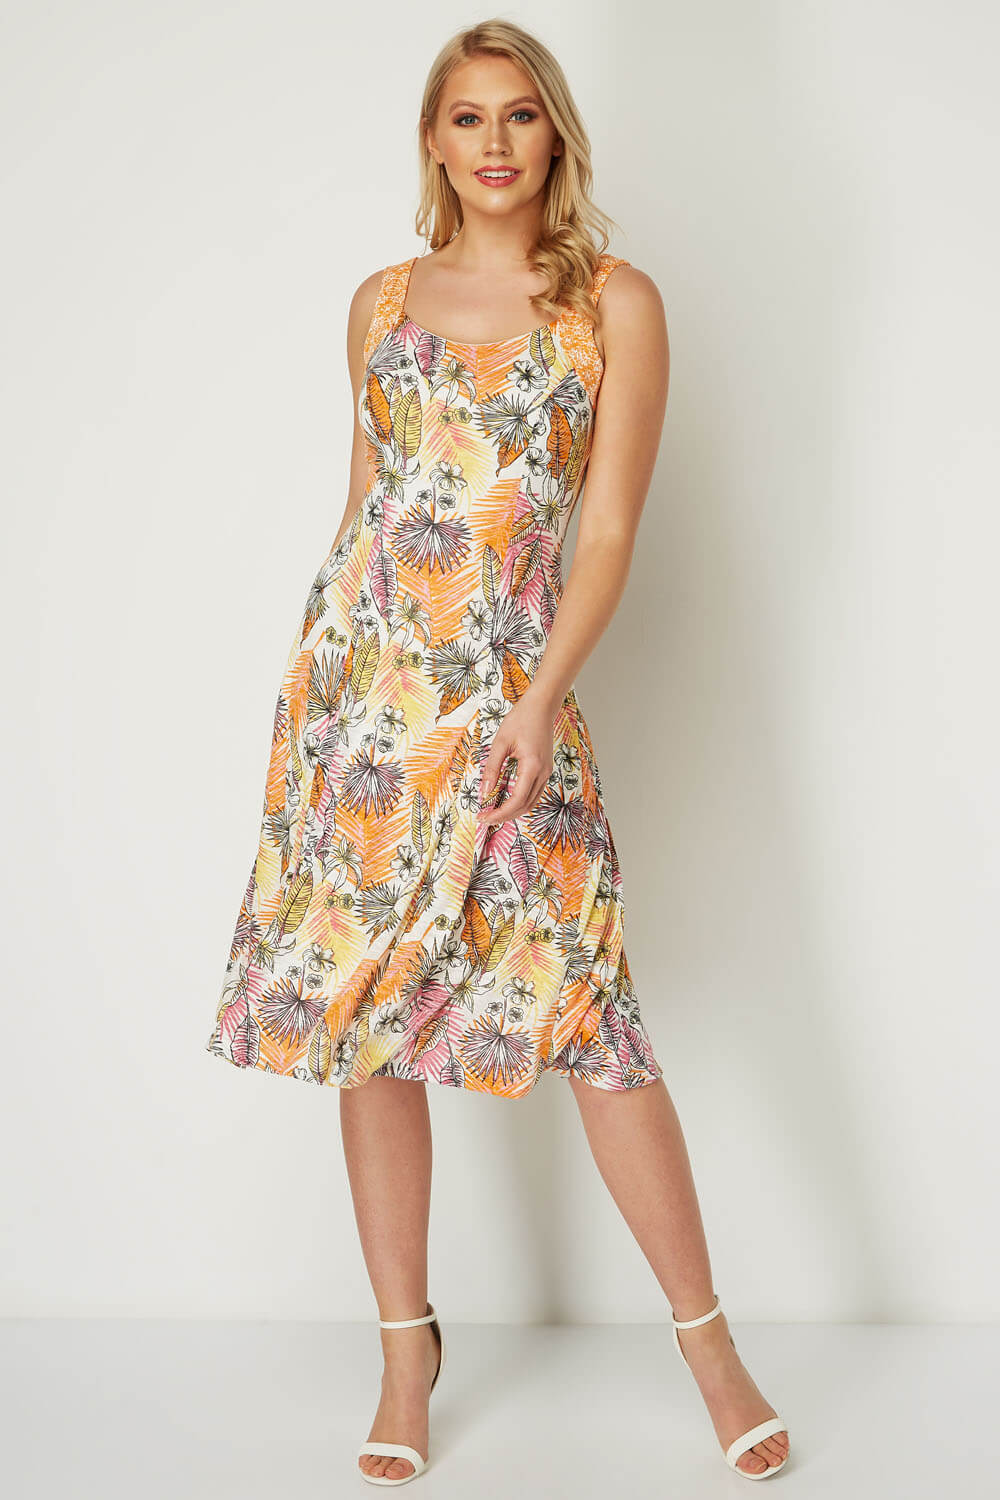 ORANGE Tropical Burnout Fit and Flare Dress, Image 2 of 5